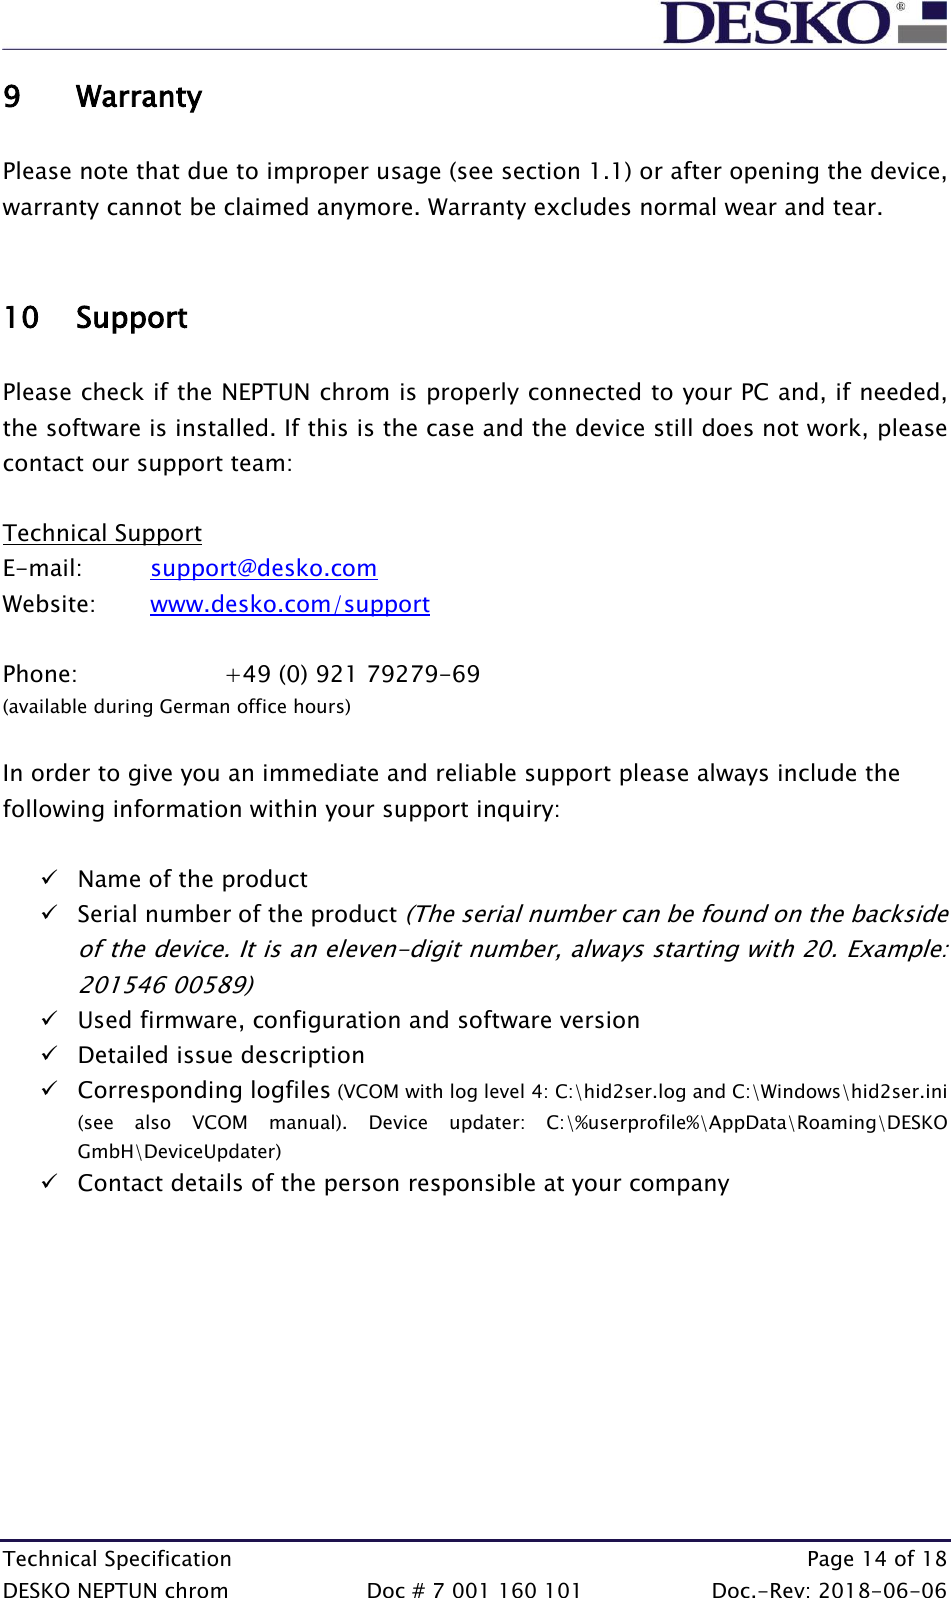  Technical Specification    Page 14 of 18 DESKO NEPTUN chrom  Doc # 7 001 160 101  Doc.-Rev: 2018-06-06 9 Warranty  Please note that due to improper usage (see section 1.1) or after opening the device, warranty cannot be claimed anymore. Warranty excludes normal wear and tear.   10 Support  Please check if the NEPTUN chrom is properly connected to your PC and, if needed, the software is installed. If this is the case and the device still does not work, please contact our support team:  Technical Support E-mail:   support@desko.com   Website:   www.desko.com/support   Phone:    +49 (0) 921 79279-69 (available during German office hours)  In order to give you an immediate and reliable support please always include the following information within your support inquiry:  ✓ Name of the product ✓ Serial number of the product (The serial number can be found on the backside of the device. It is an eleven-digit number, always starting with 20. Example: 201546 00589) ✓ Used firmware, configuration and software version ✓ Detailed issue description ✓ Corresponding logfiles (VCOM with log level 4: C:\hid2ser.log and C:\Windows\hid2ser.ini (see  also  VCOM  manual).  Device  updater:  C:\%userprofile%\AppData\Roaming\DESKO GmbH\DeviceUpdater) ✓ Contact details of the person responsible at your company      